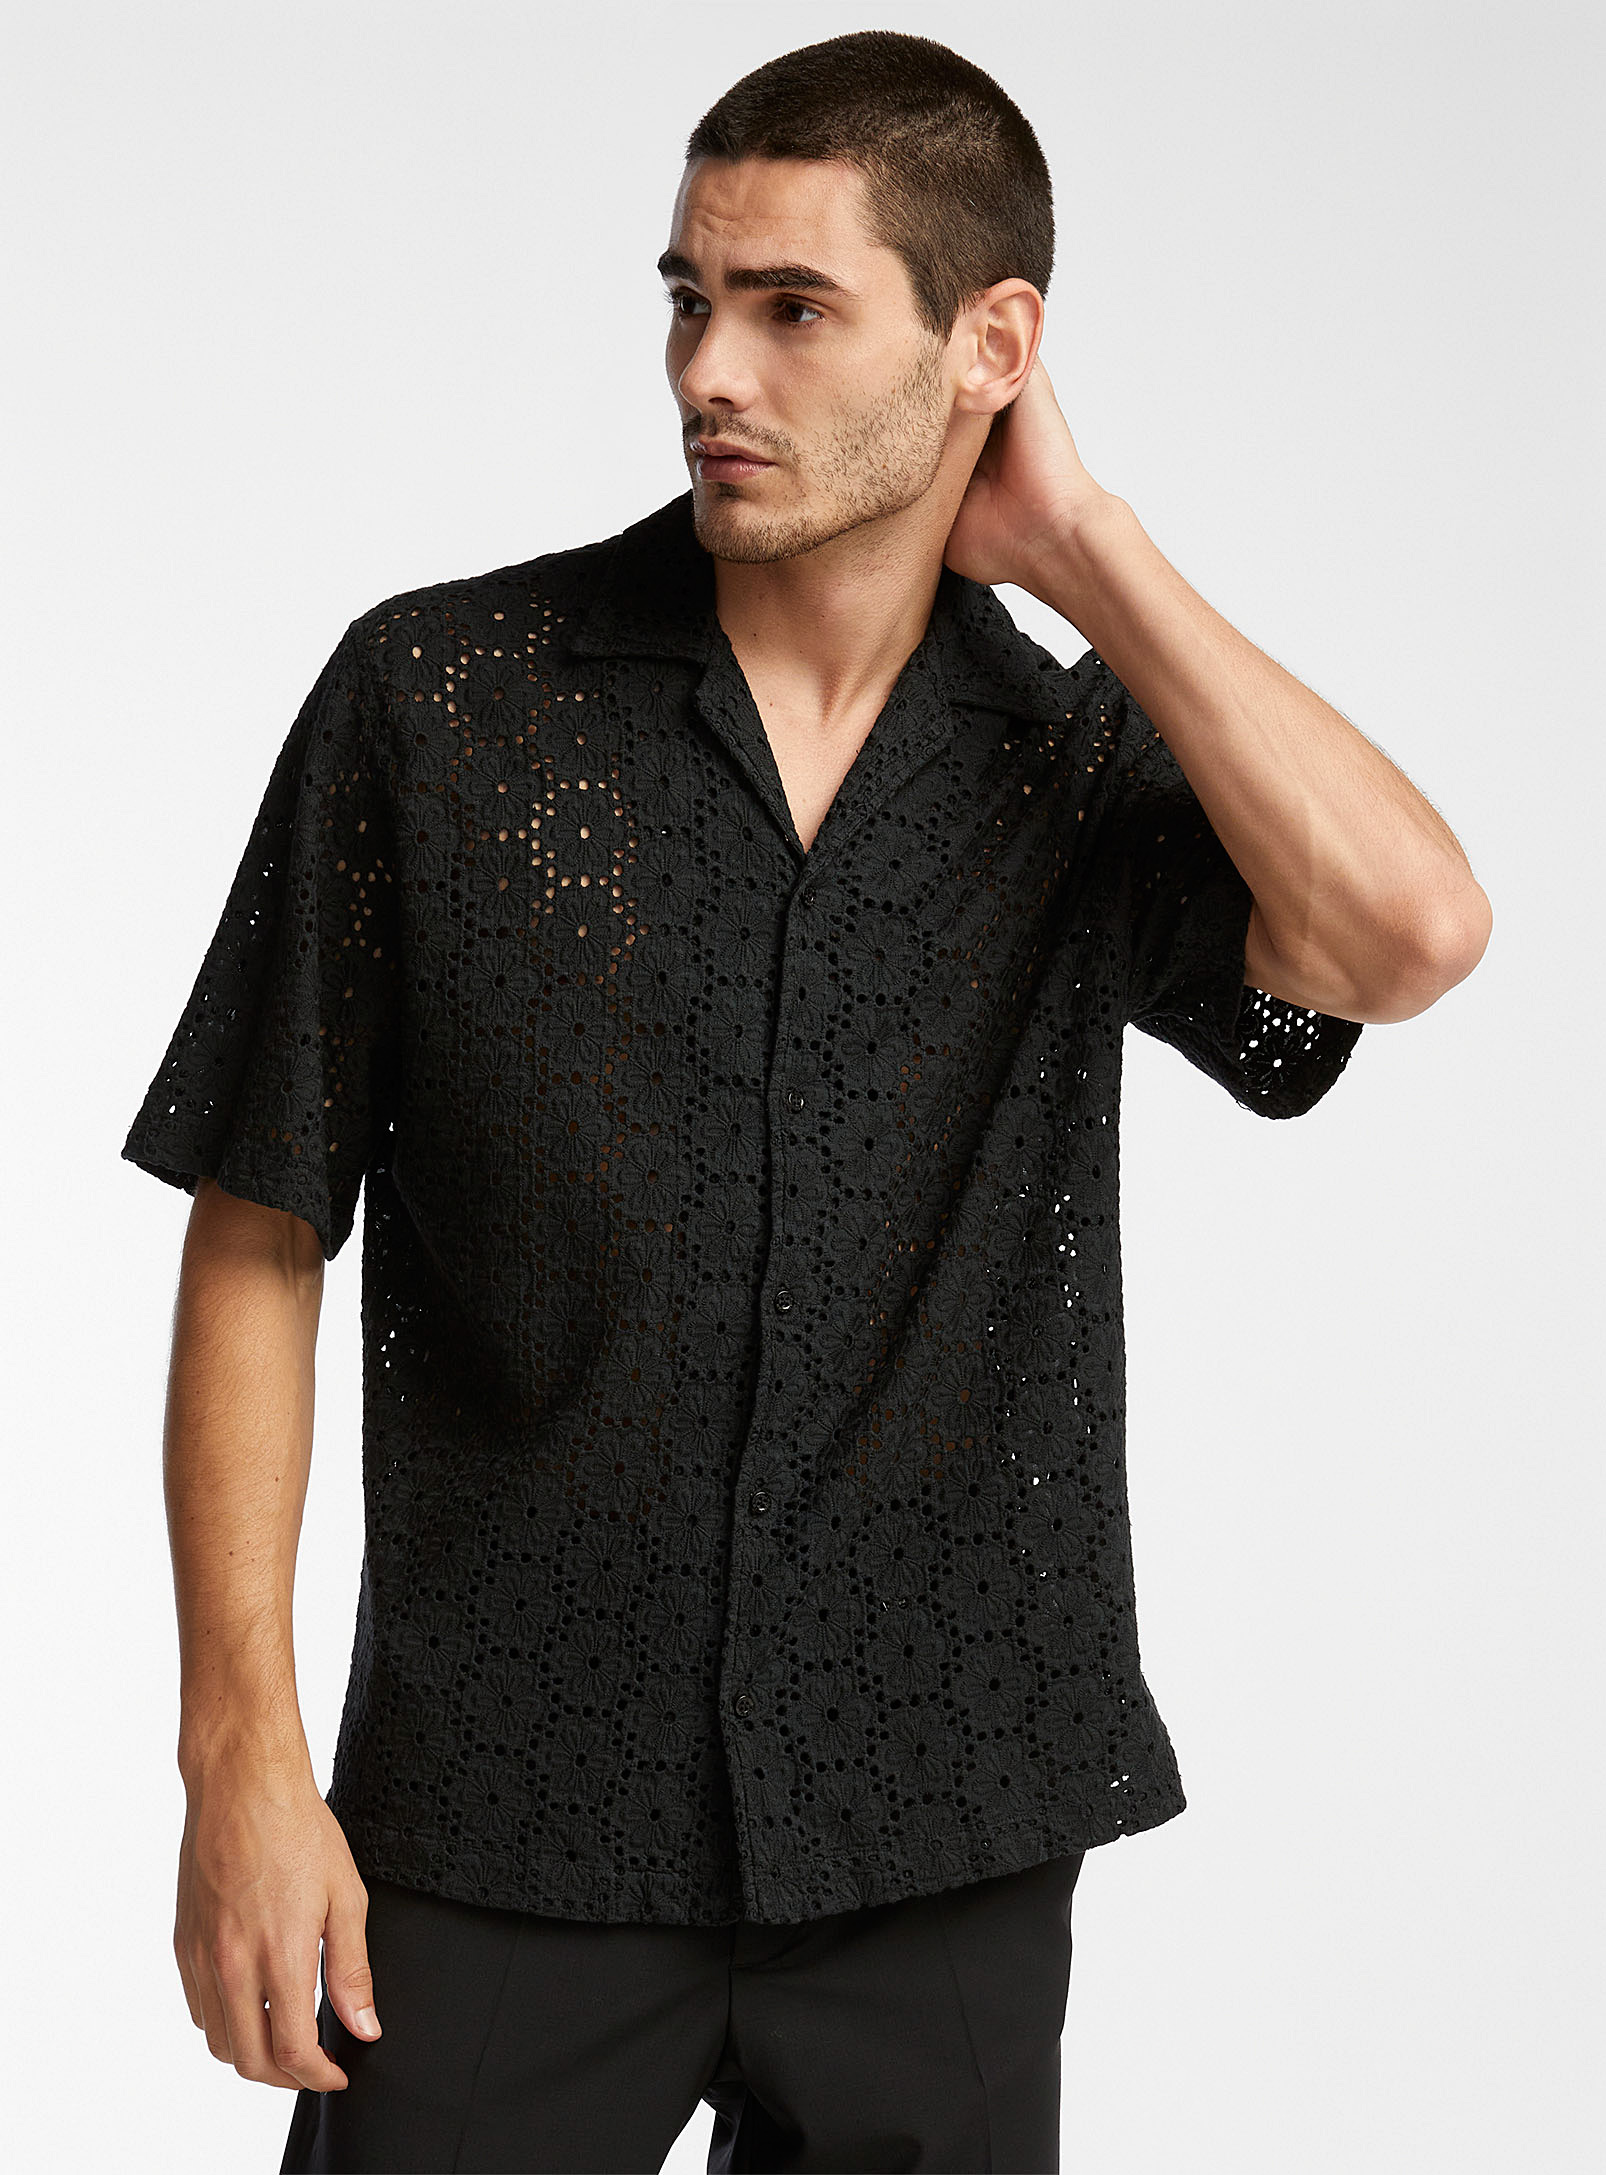 I'M BRIAN - Men's Floral medallion broderie anglaise shirt